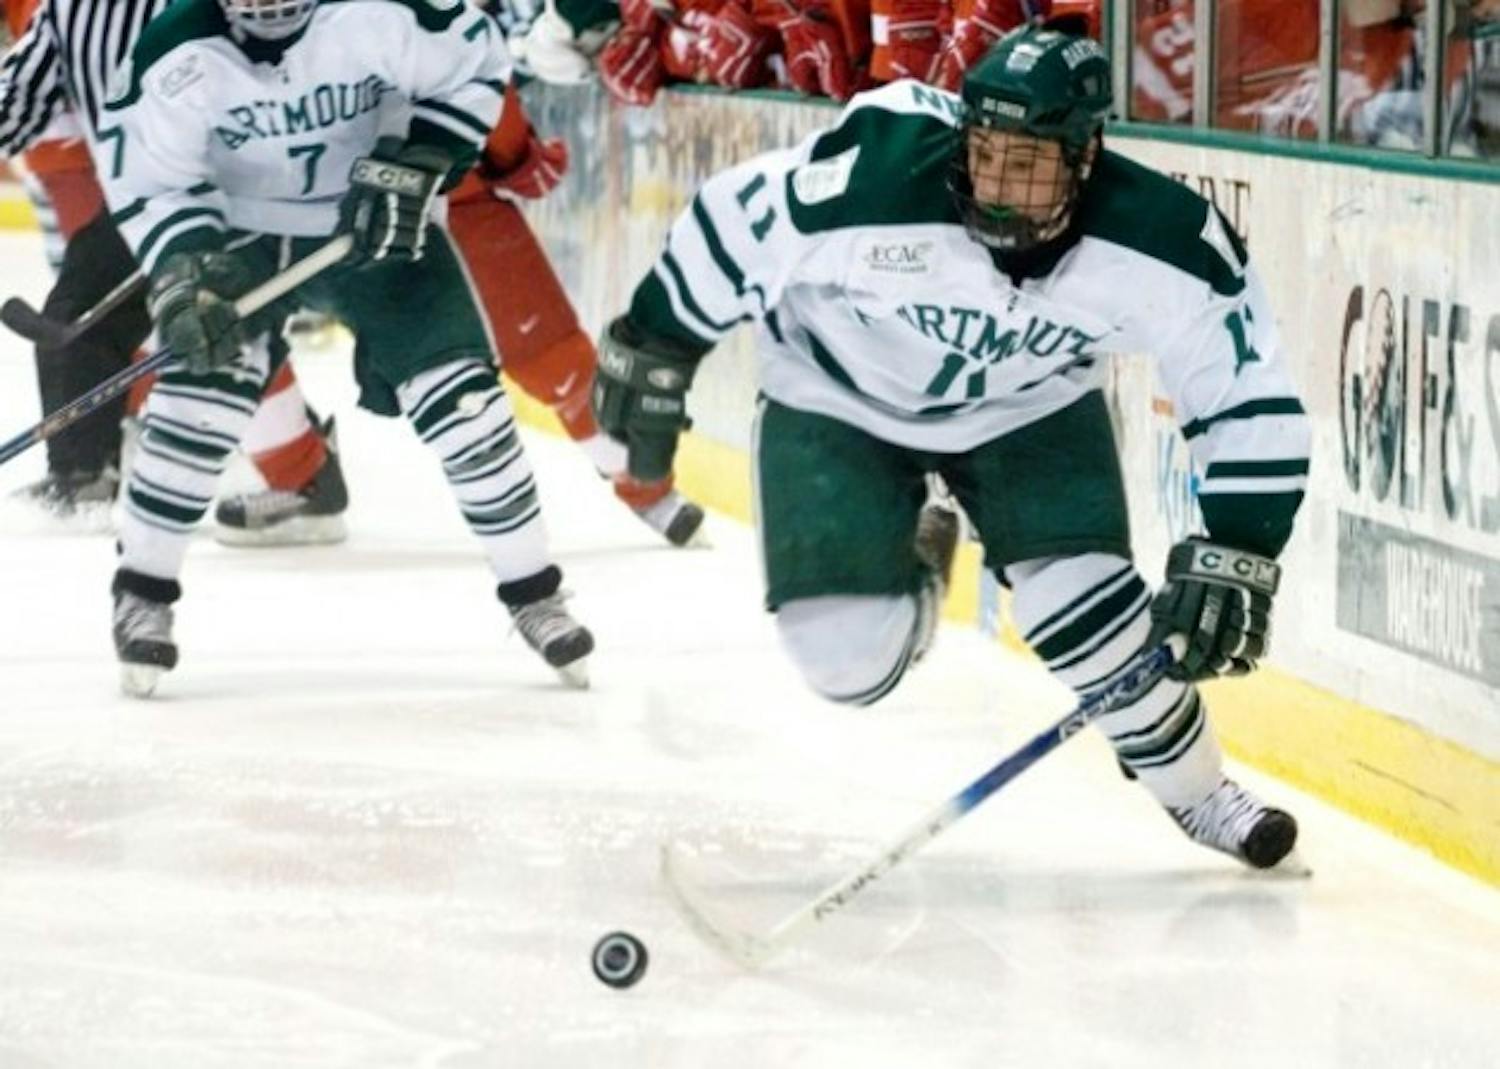 The men's hockey team pulled out a pair of big wins, cementing a playoff bye and a share of the Ivy League title.